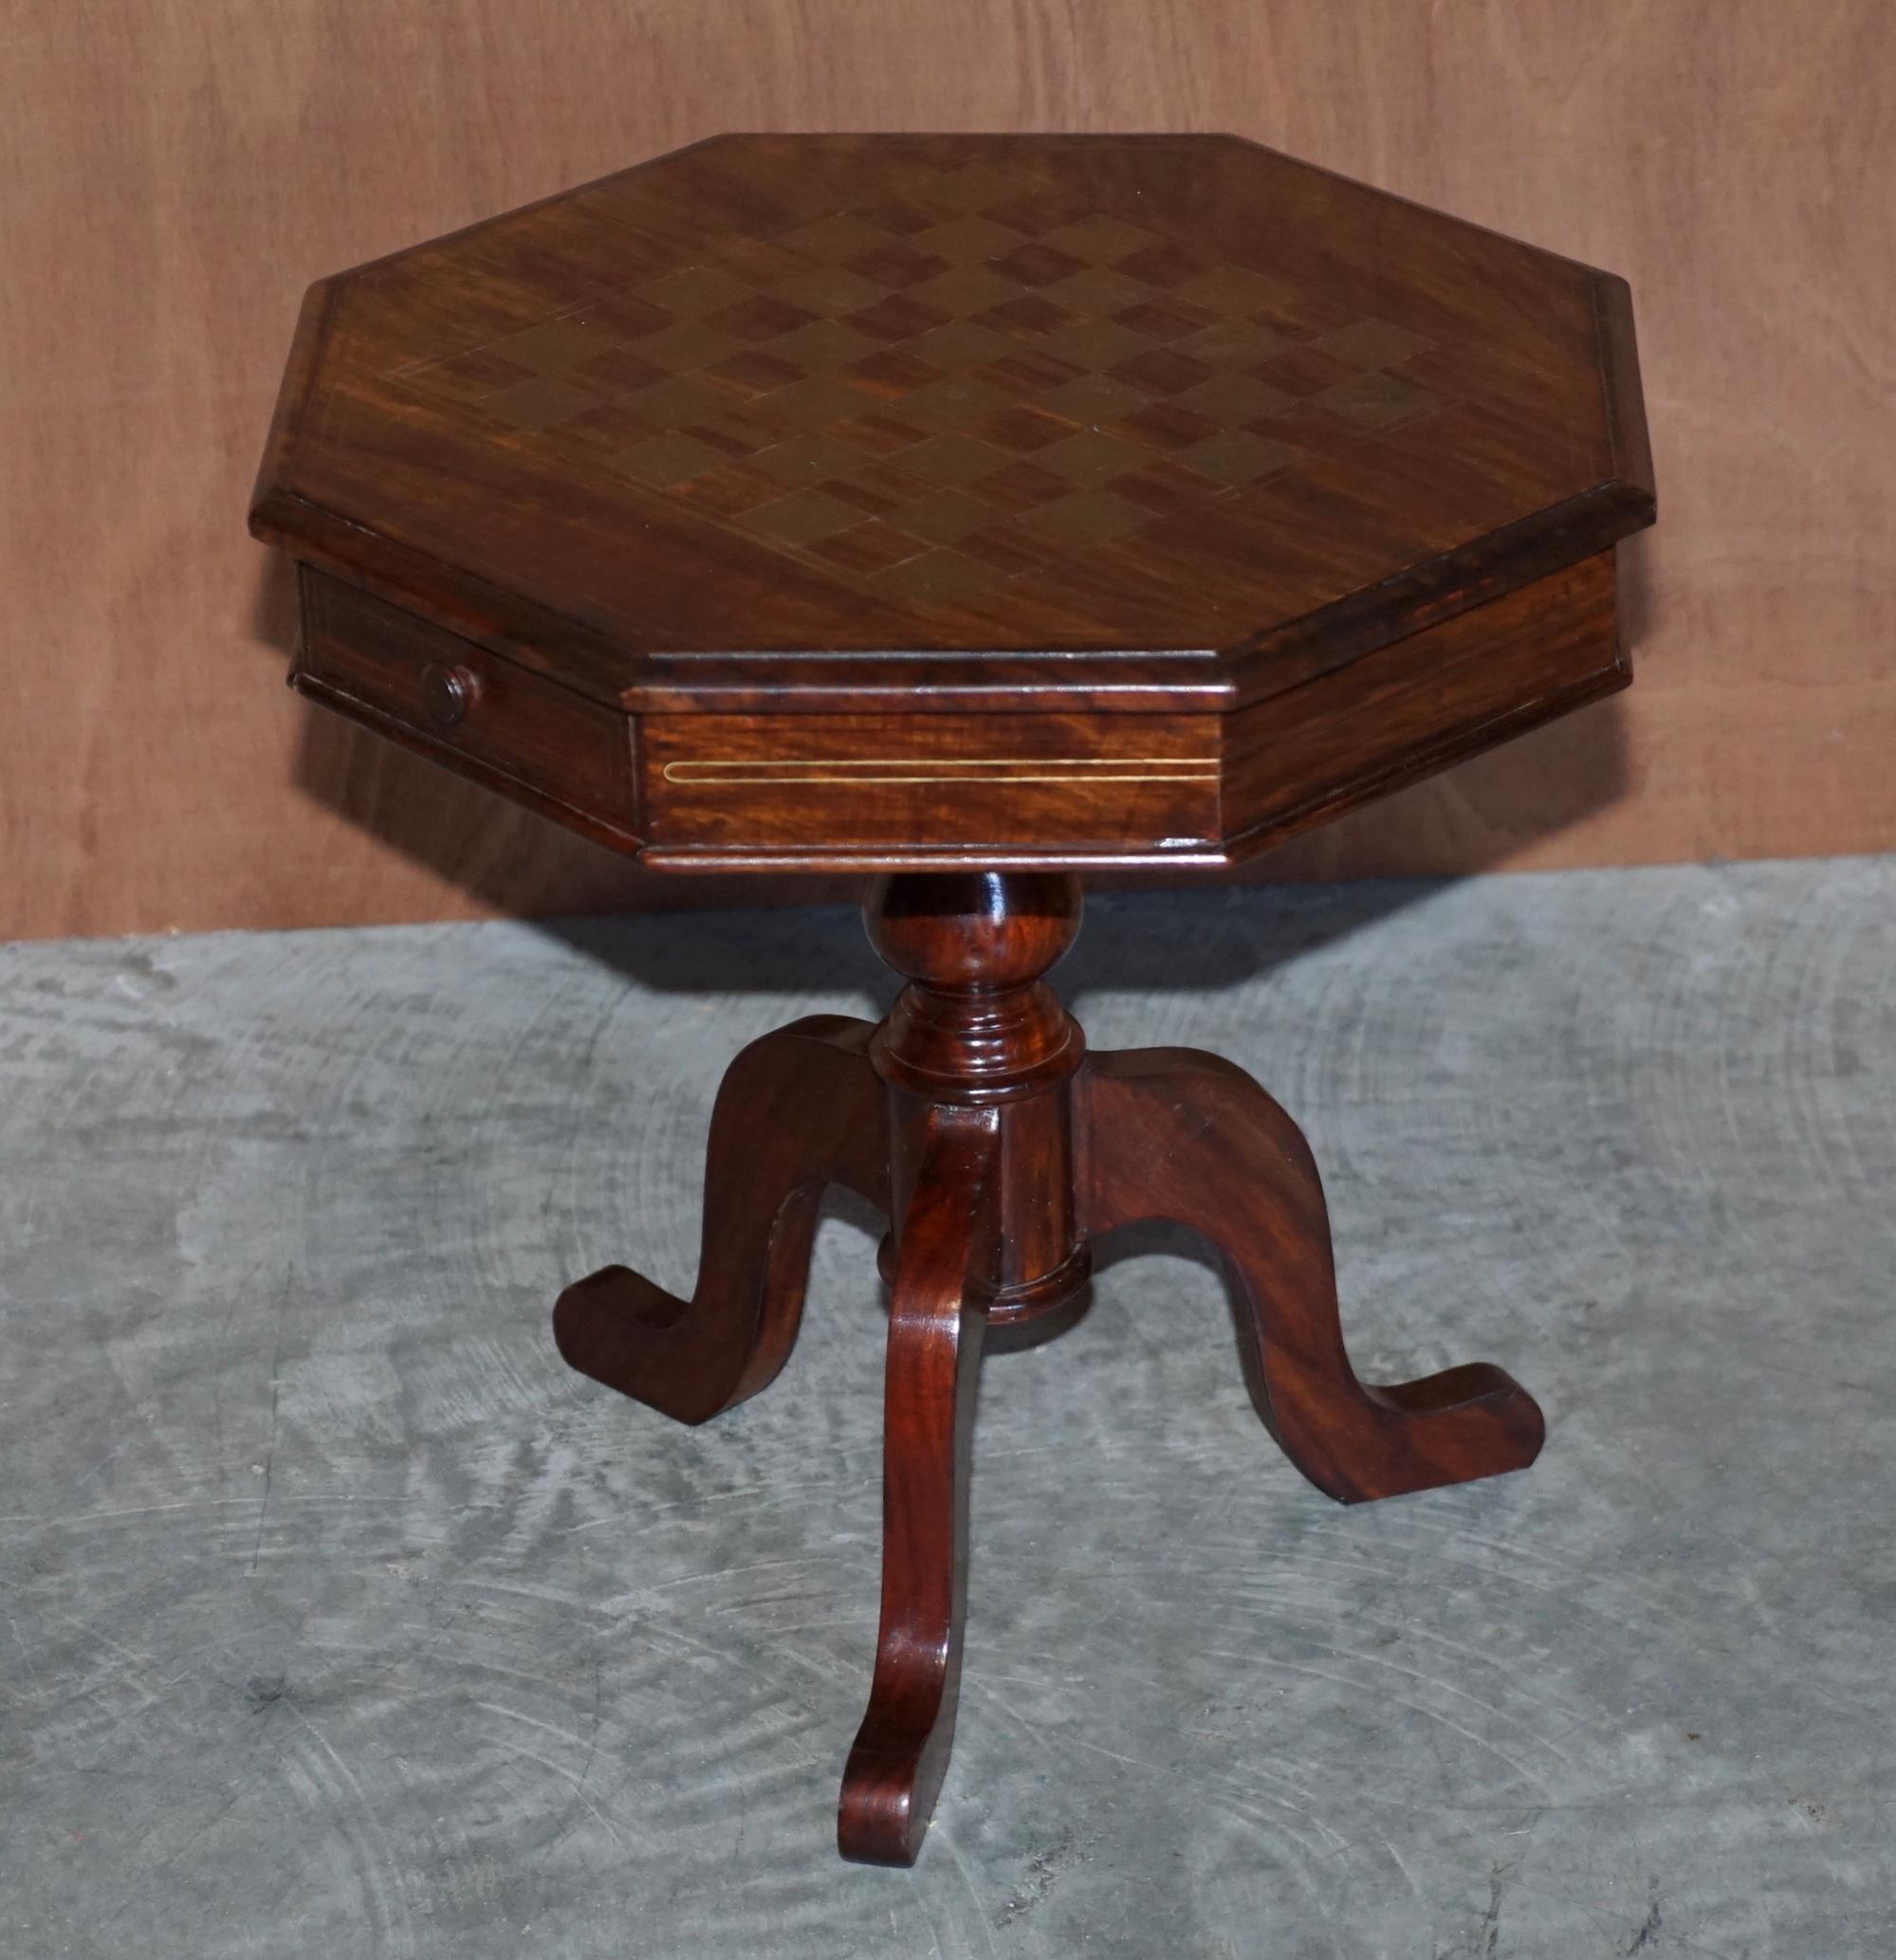 We are delighted to offer for sale this lovely Victorian Rosewood with brass inlay Chess games table with Staunton style chess set 

A very good looking well-made and function piece of furniture, extremely decorative, the whole piece is solid